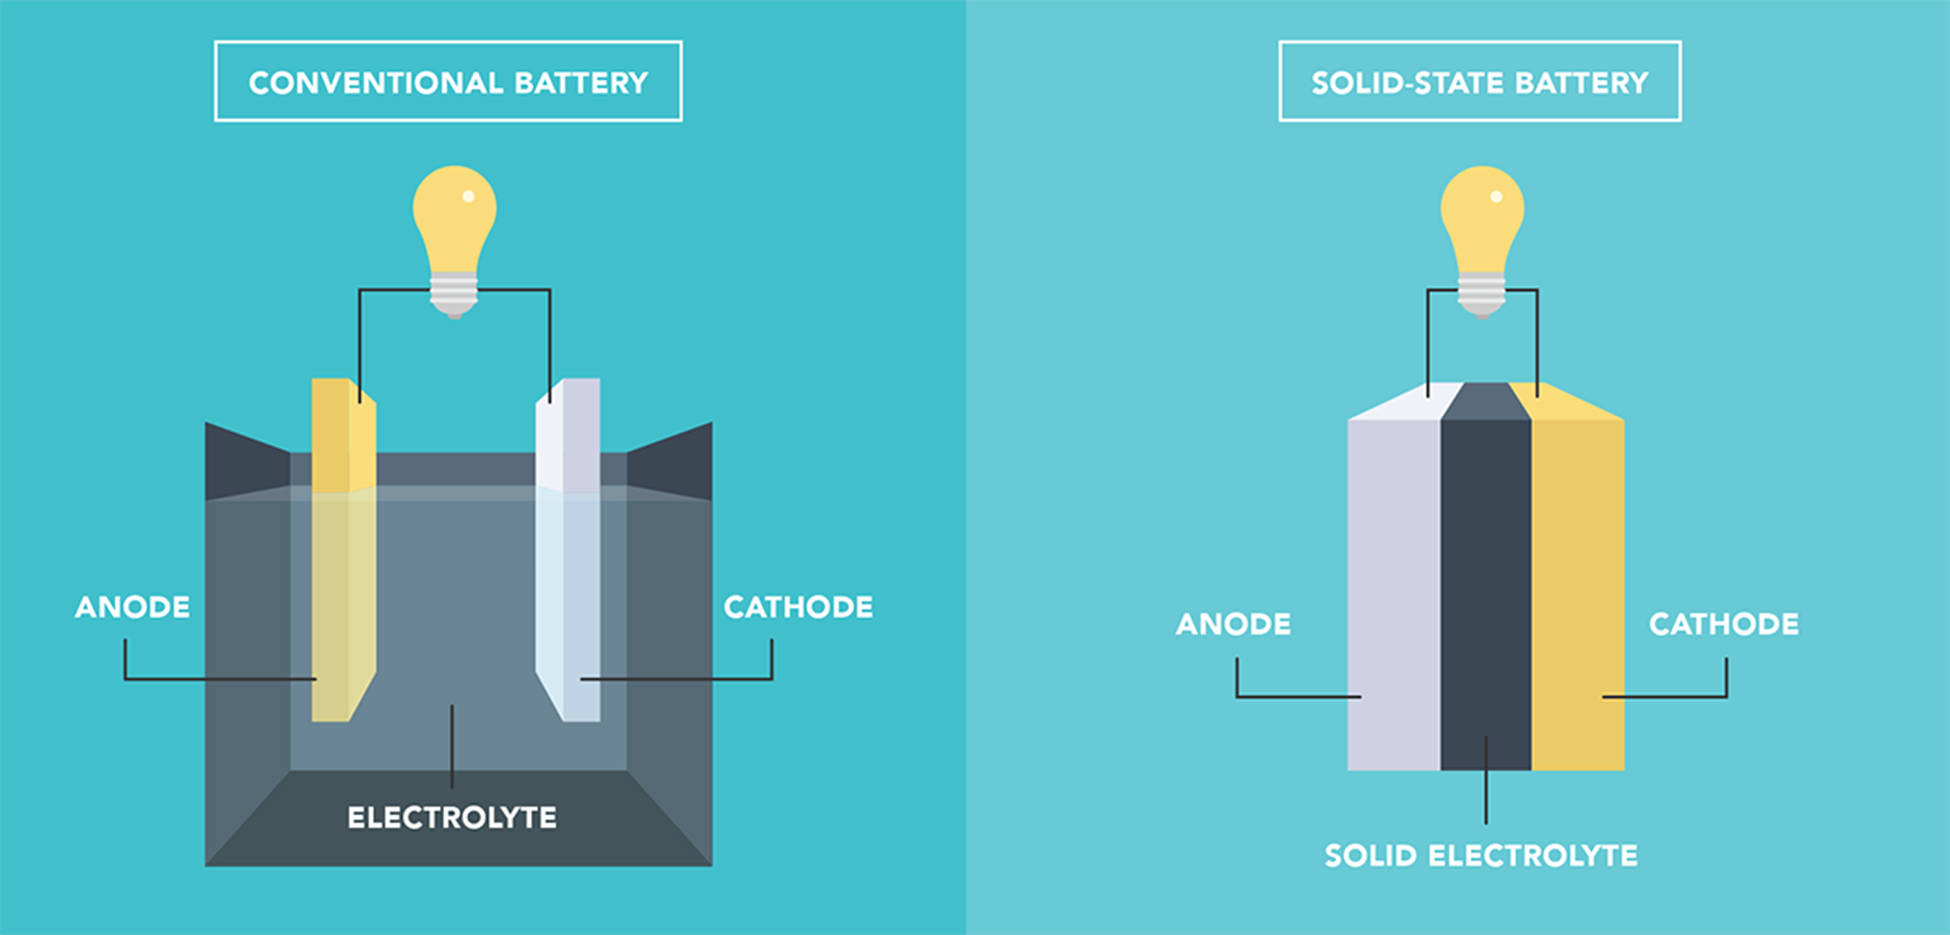 Two images comparing the features of a conventional vs. solid-state battery